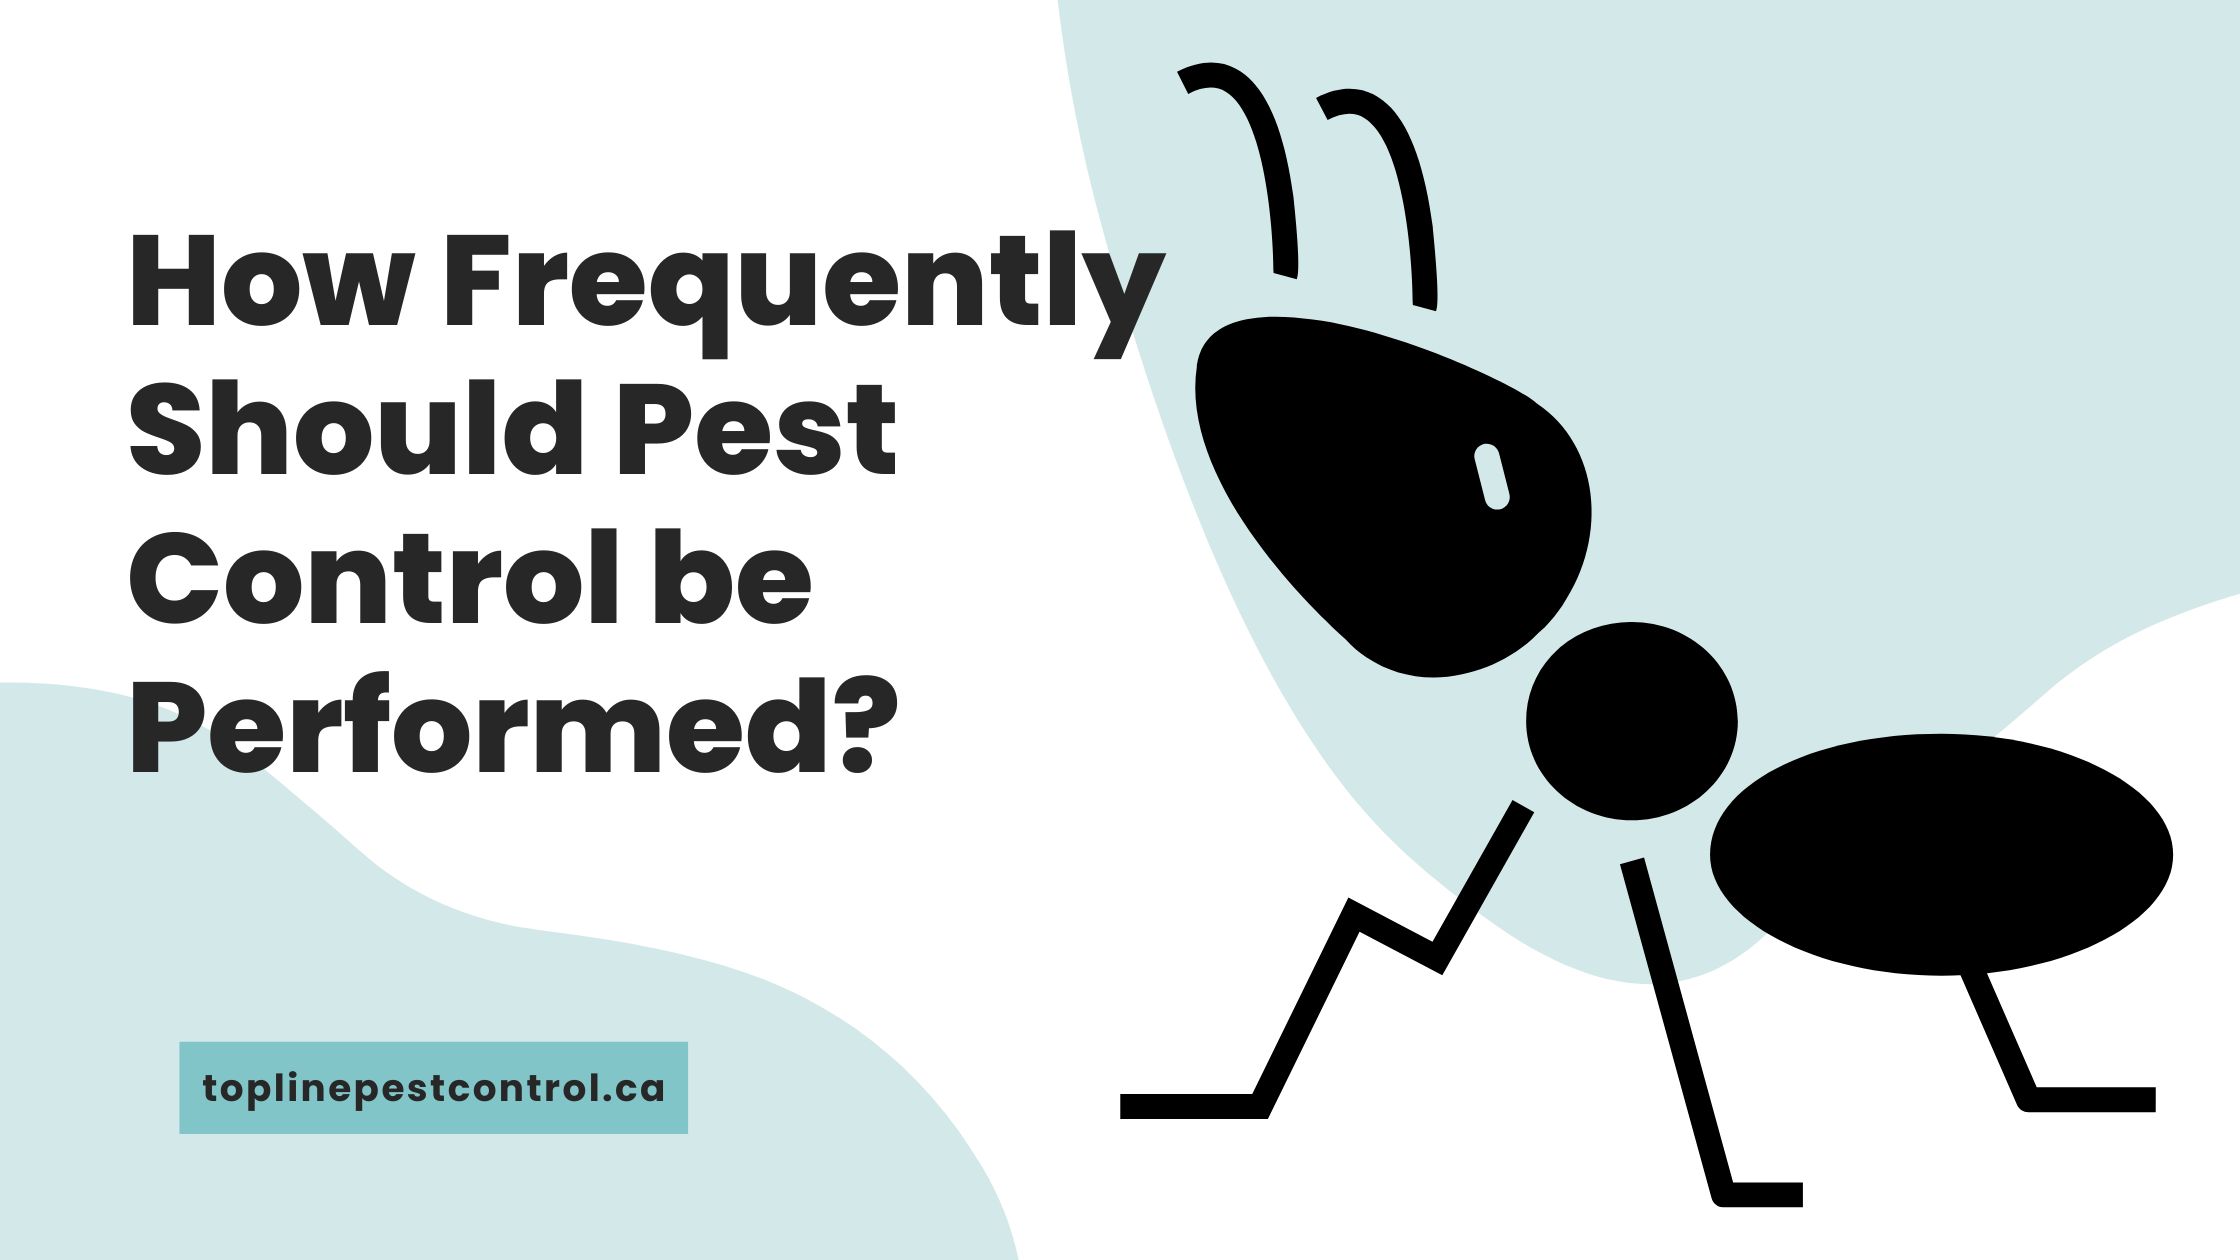 How Frequently Should Pest Control be Performed